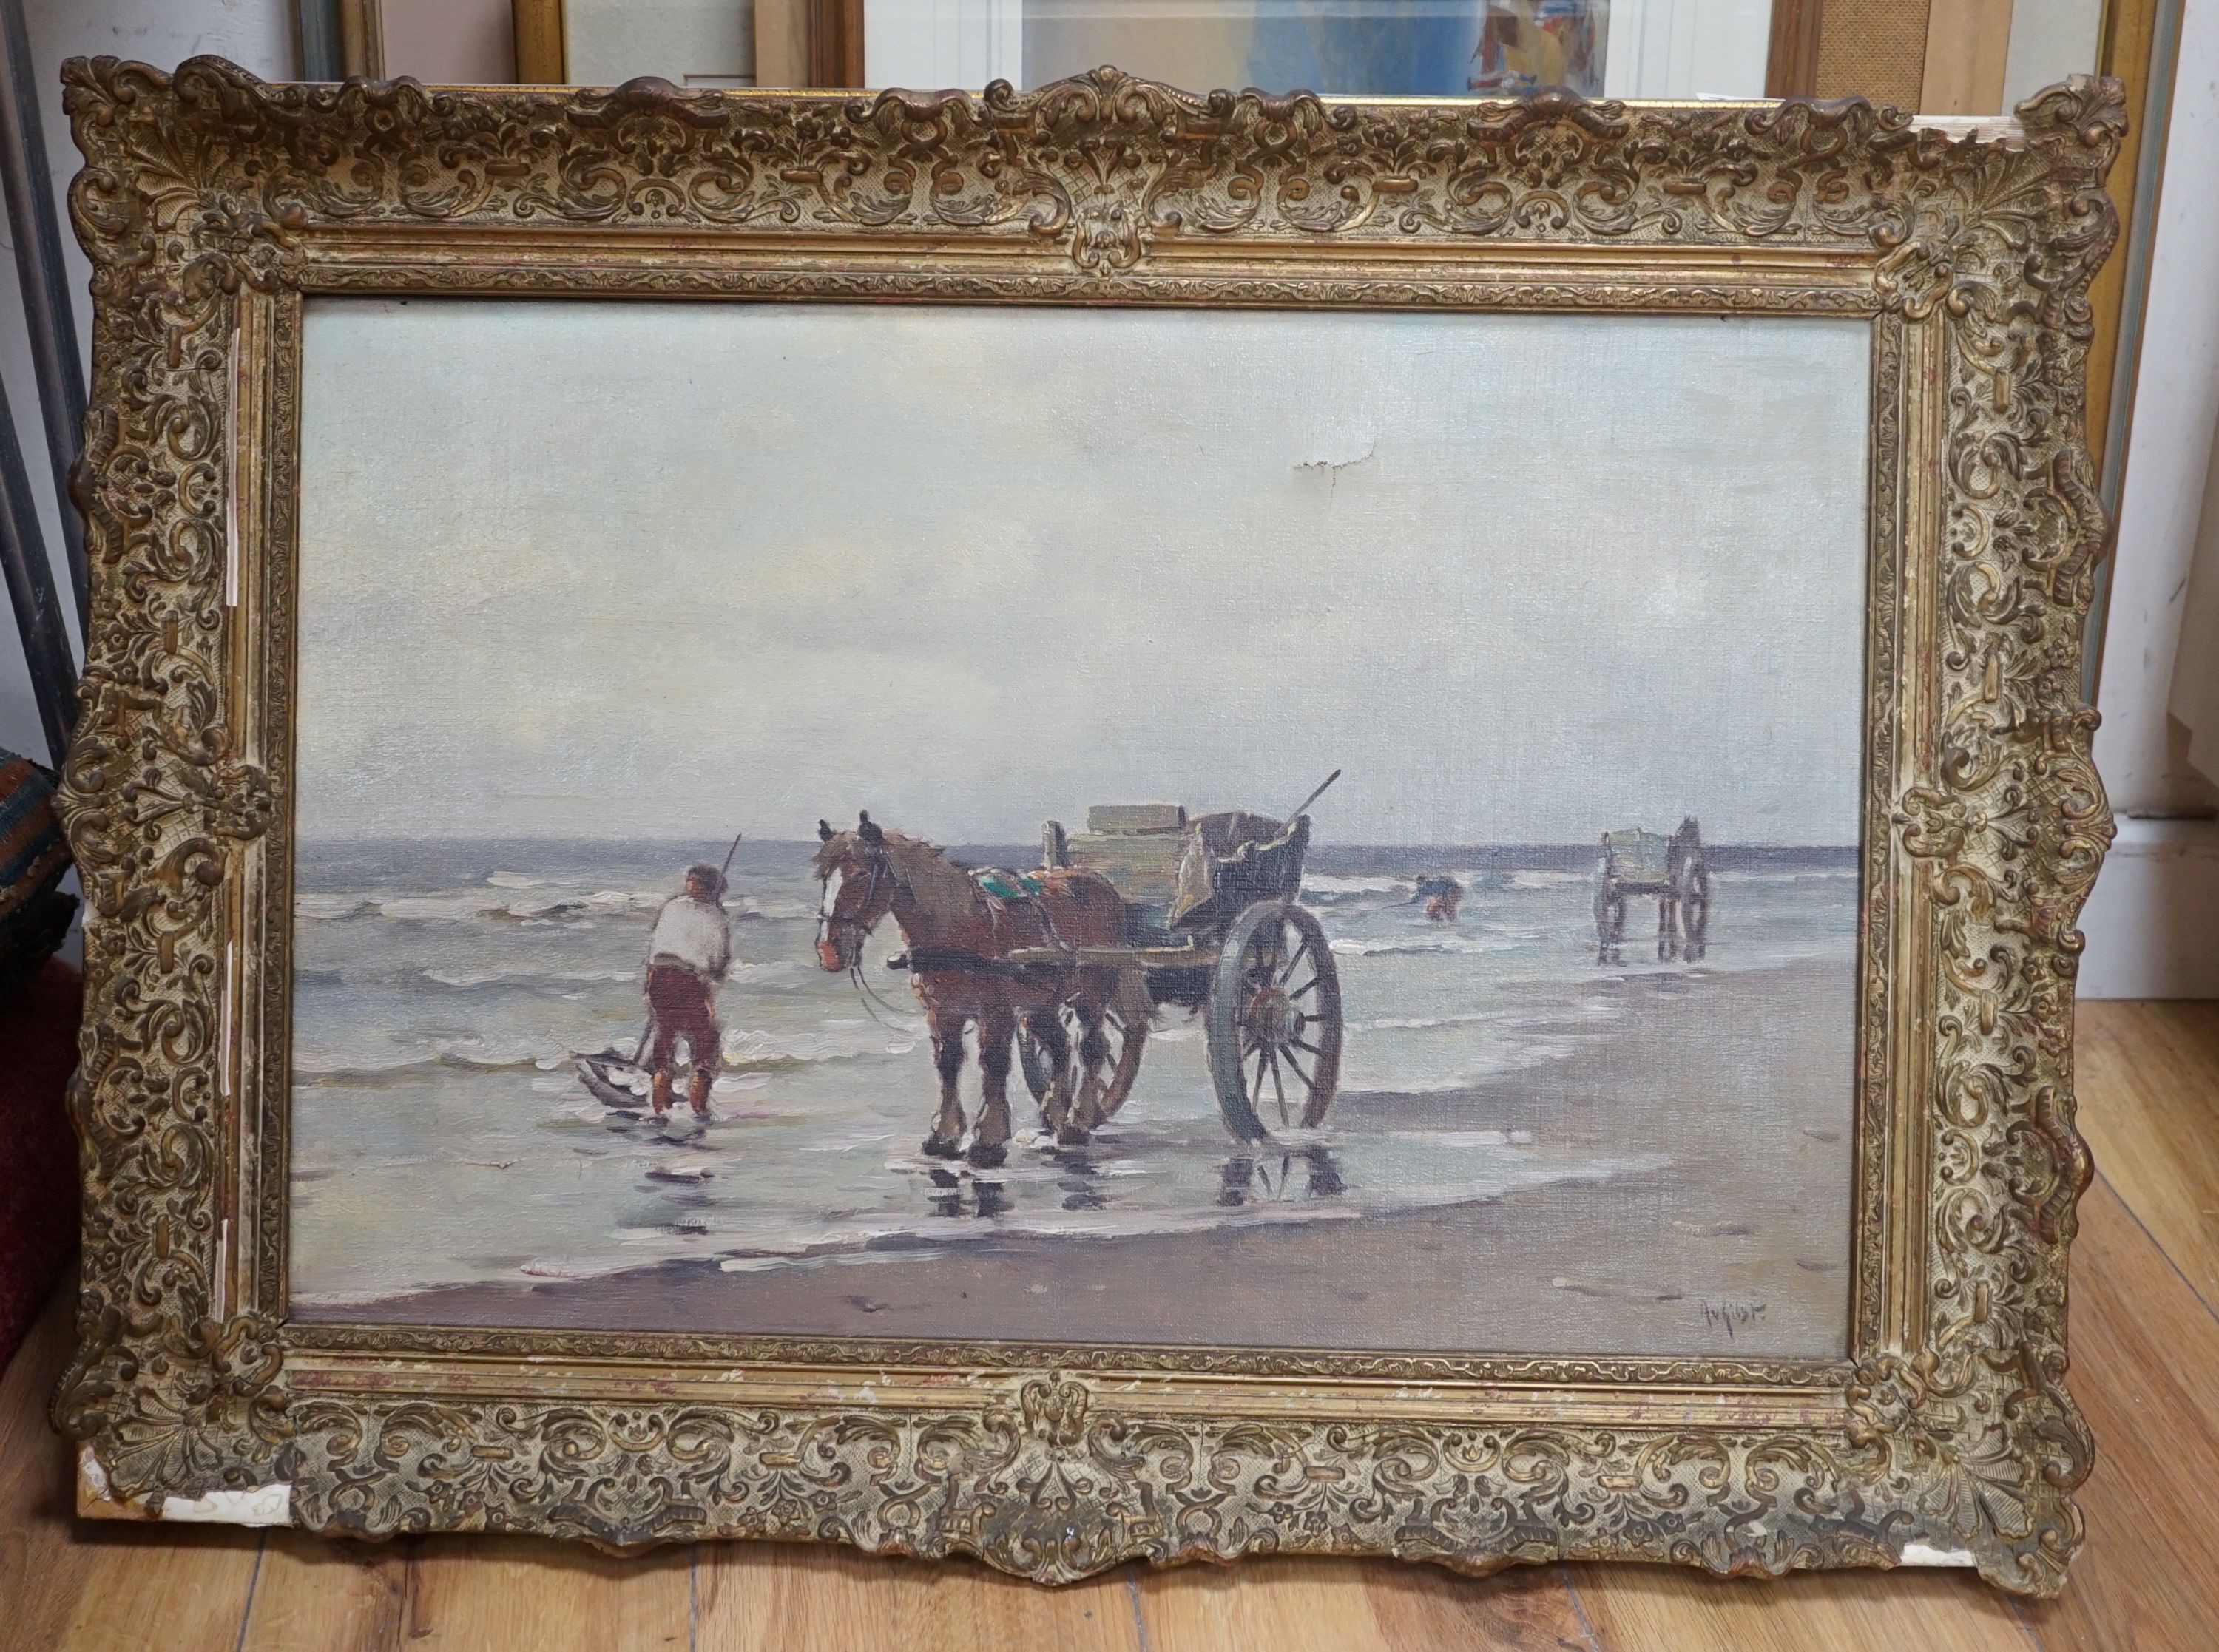 Arnout van Gilst (1898-1982), oil on canvas, seaweed gatherers, signed, 39 cm X 60 cm